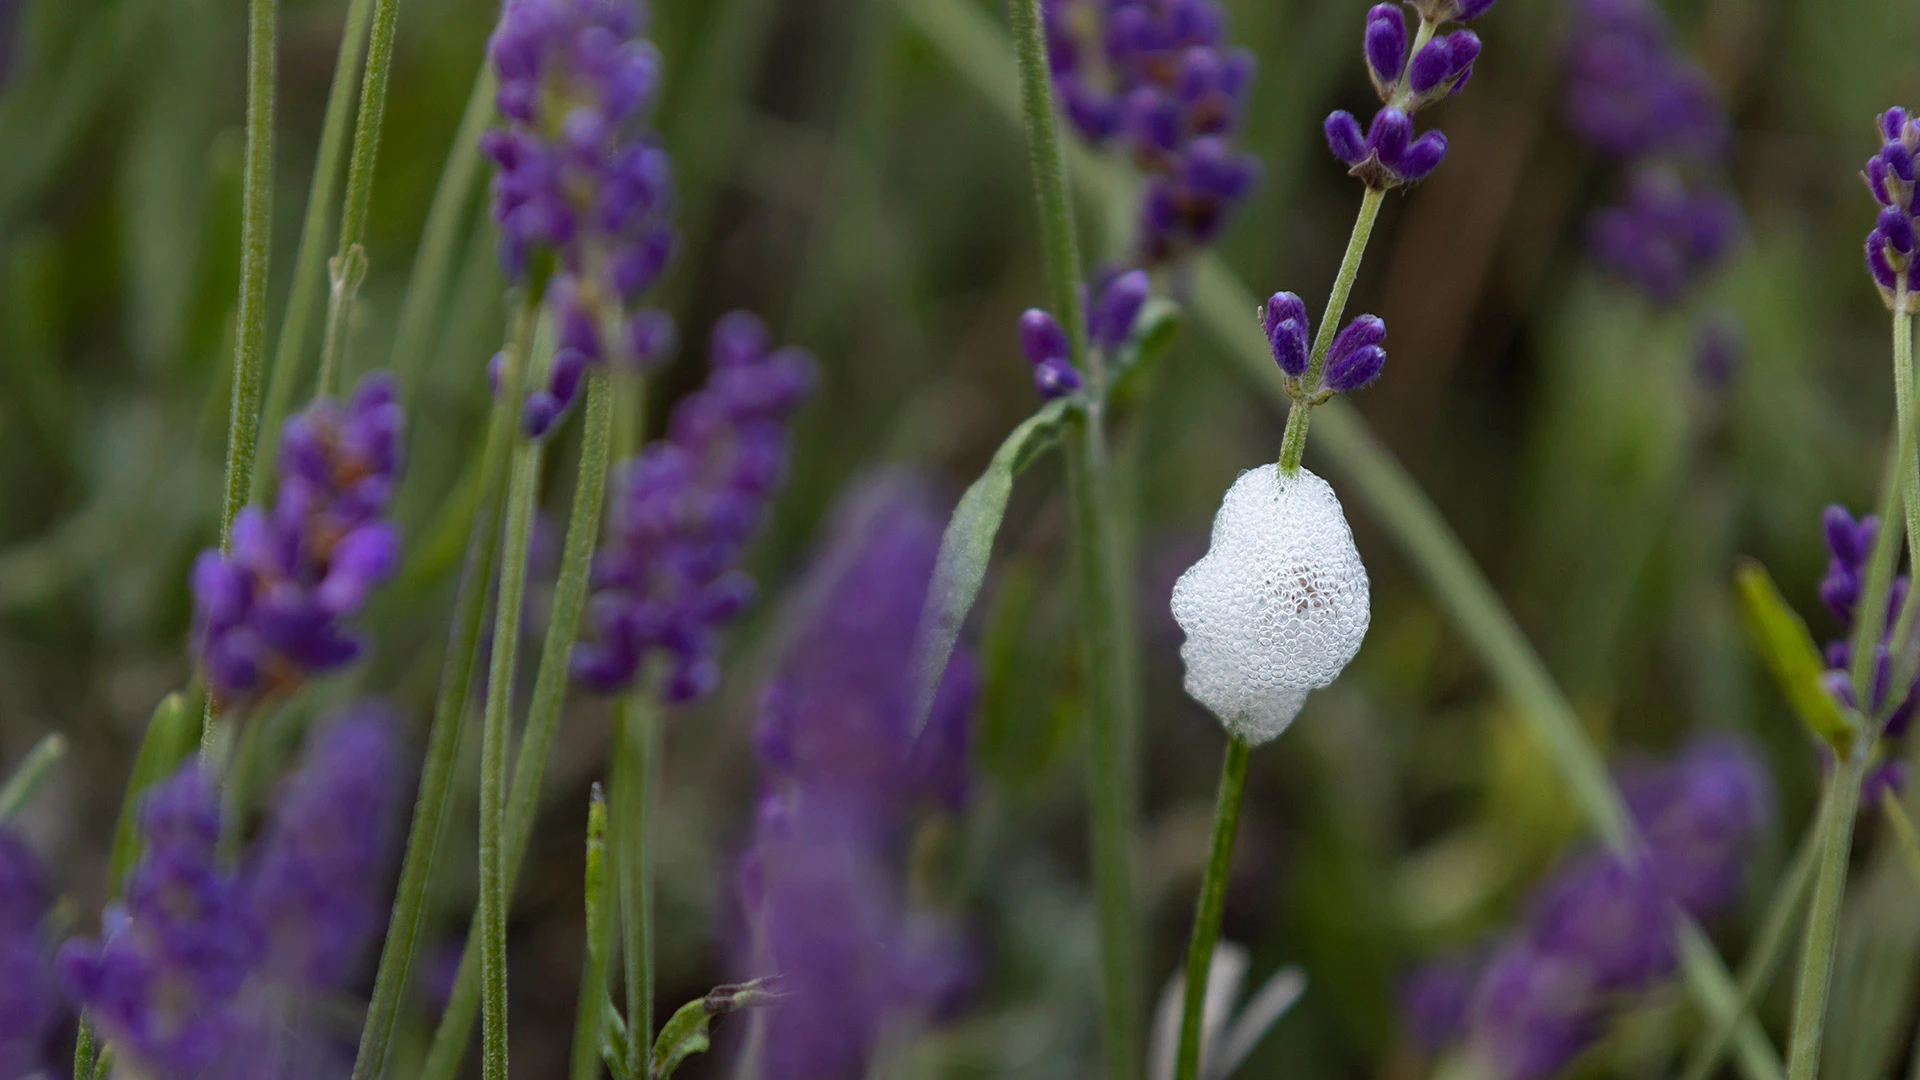 A cocoon of bubbles on a purple flower stem from a spittlebug in Benton, AR.